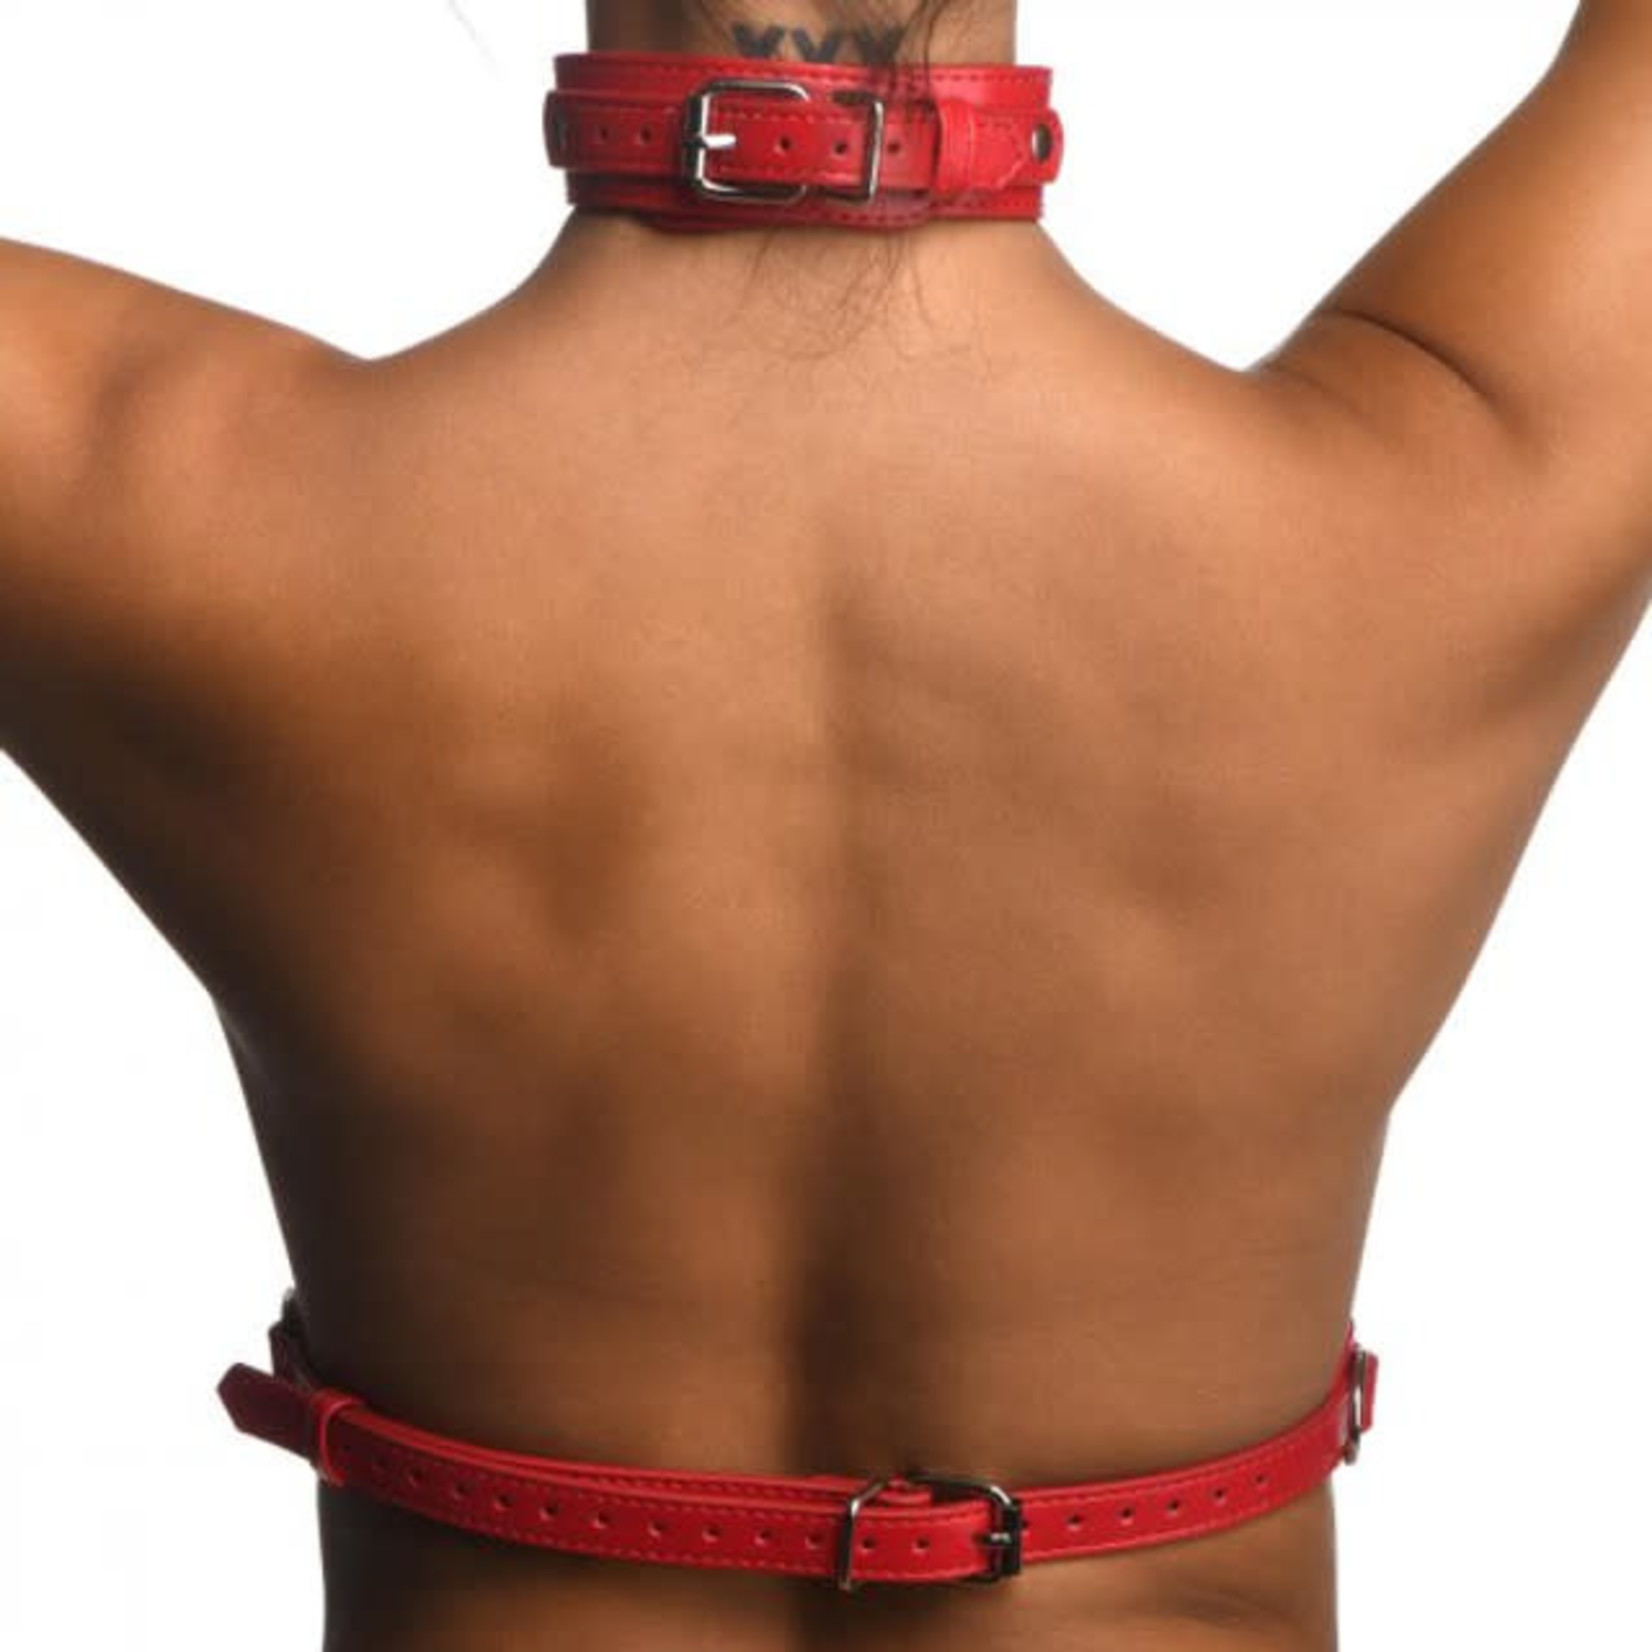 STRICT STRICT - RED FEMALE CHEST HARNESS - M/L